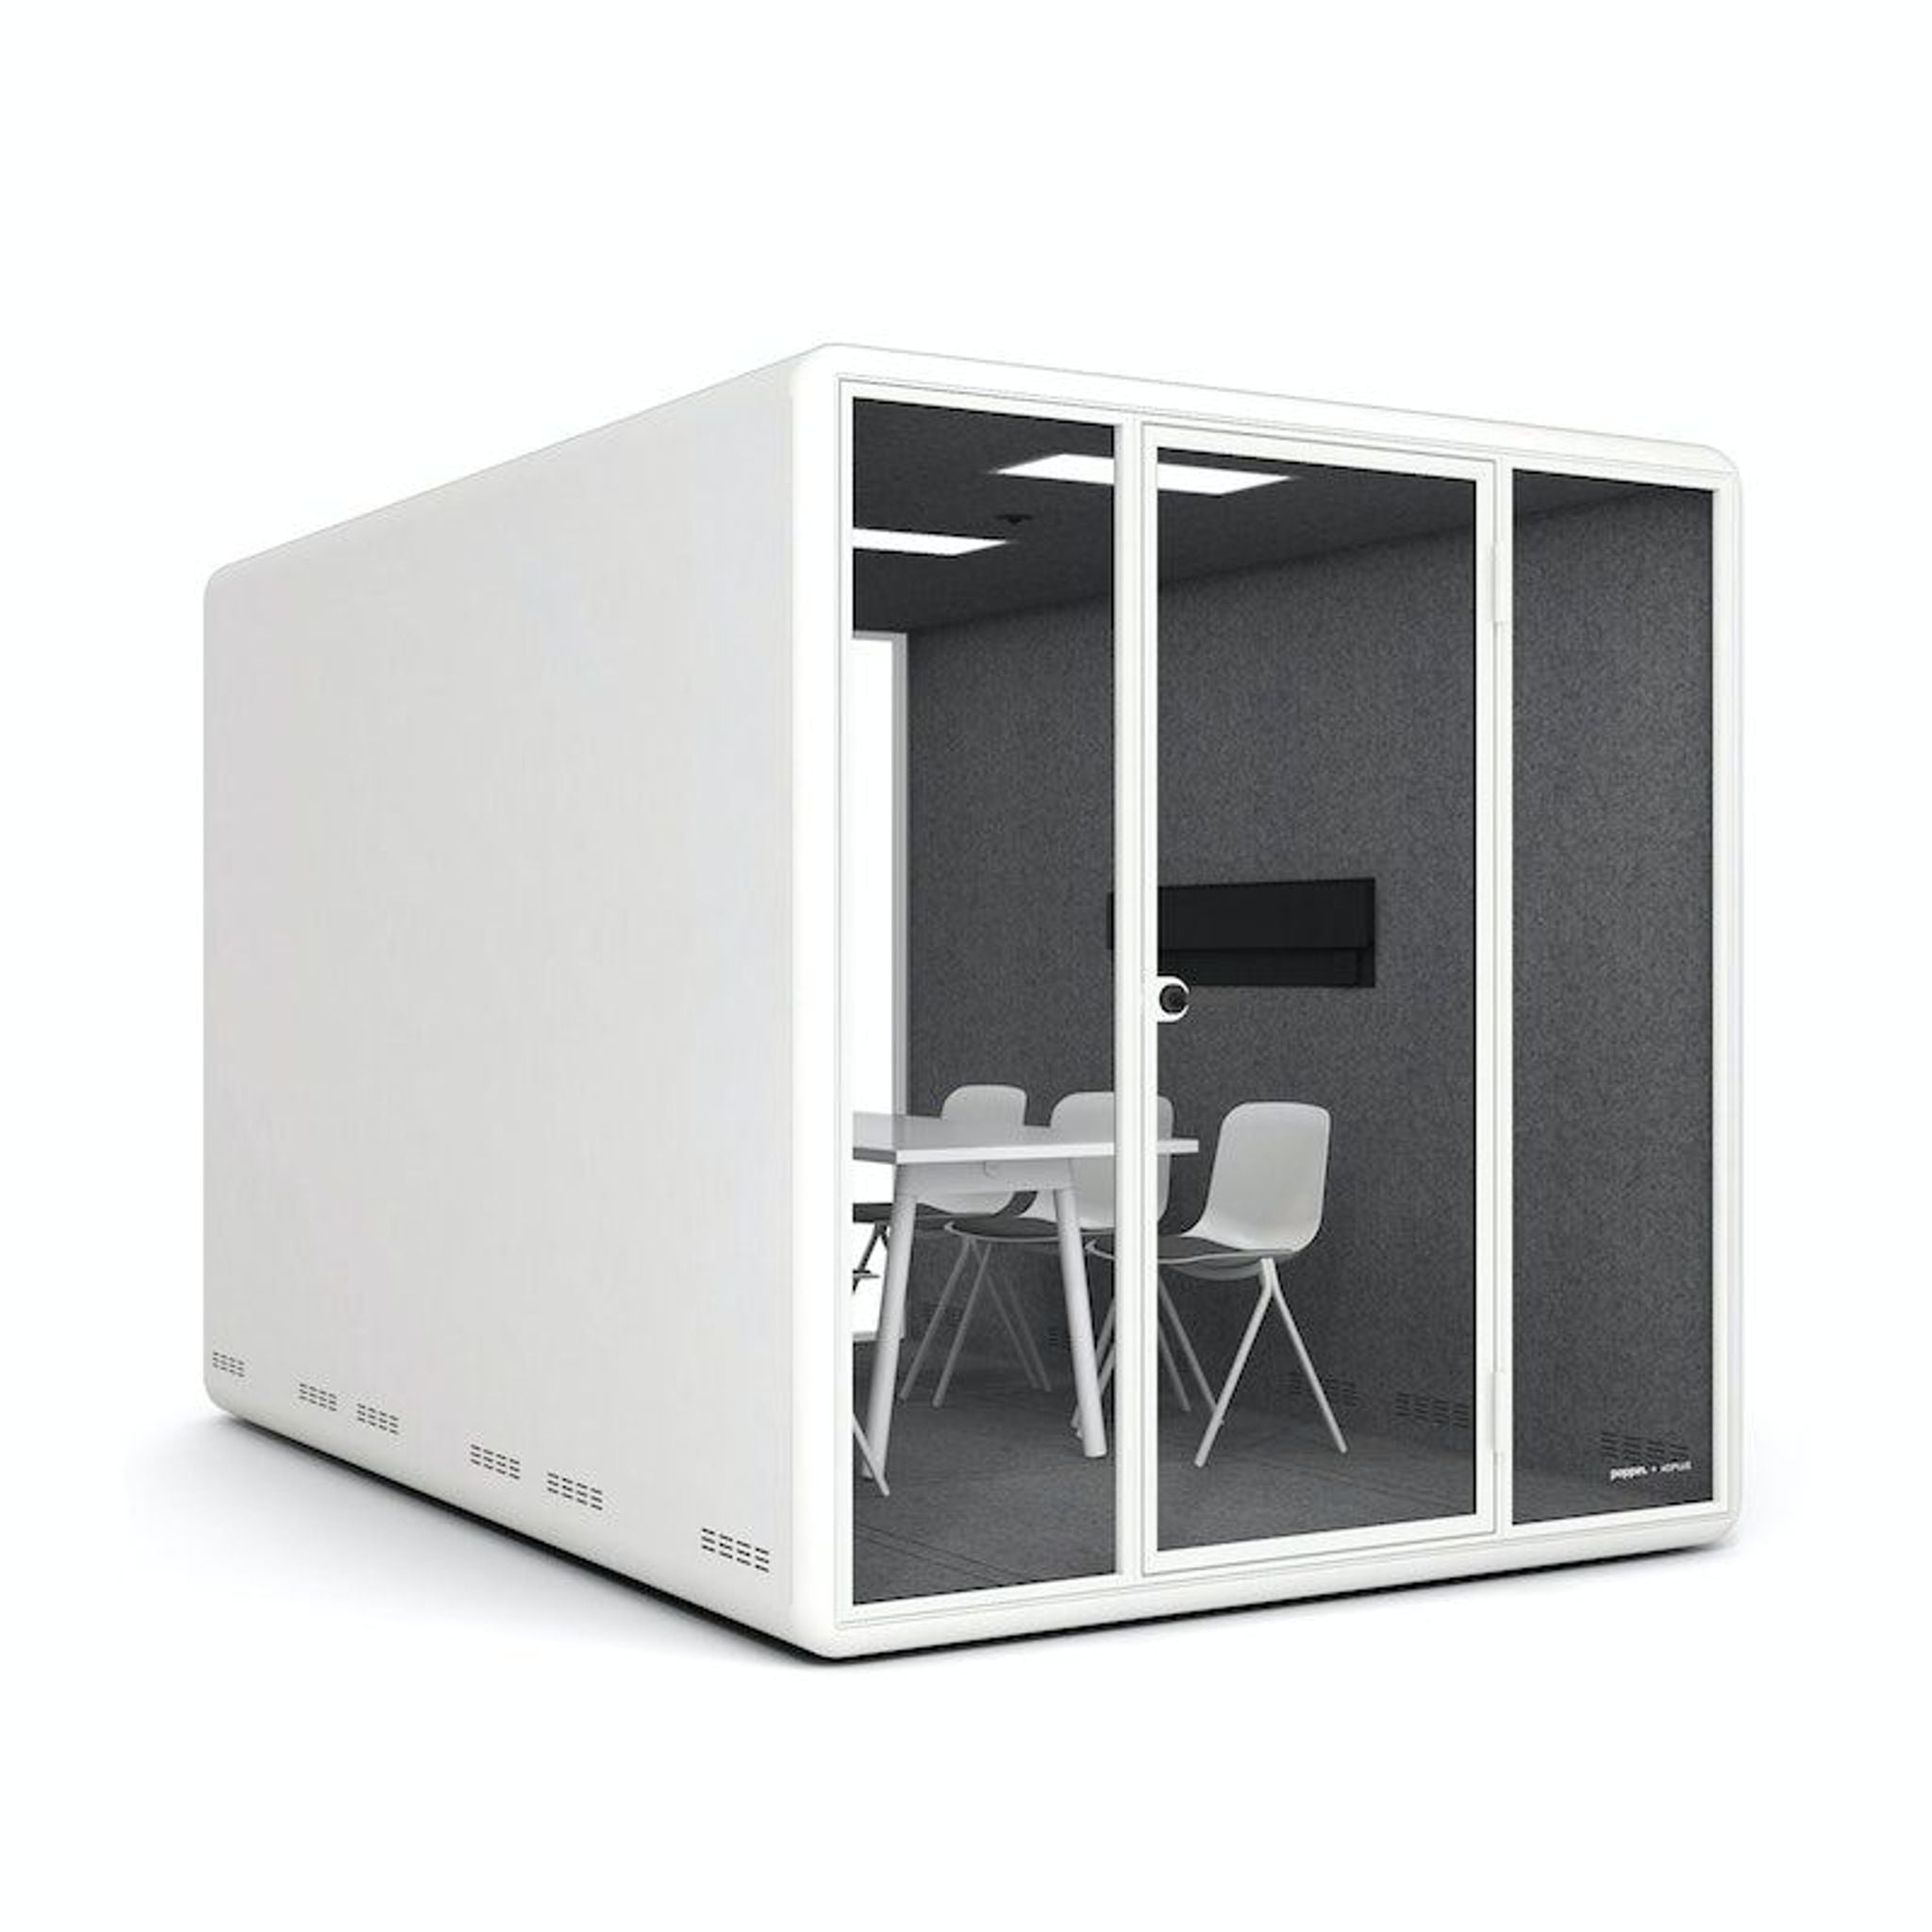 2. Poppin Kolo 6 modular meeting room with white exterior, partially shown interior with furniture, ready for assembly.